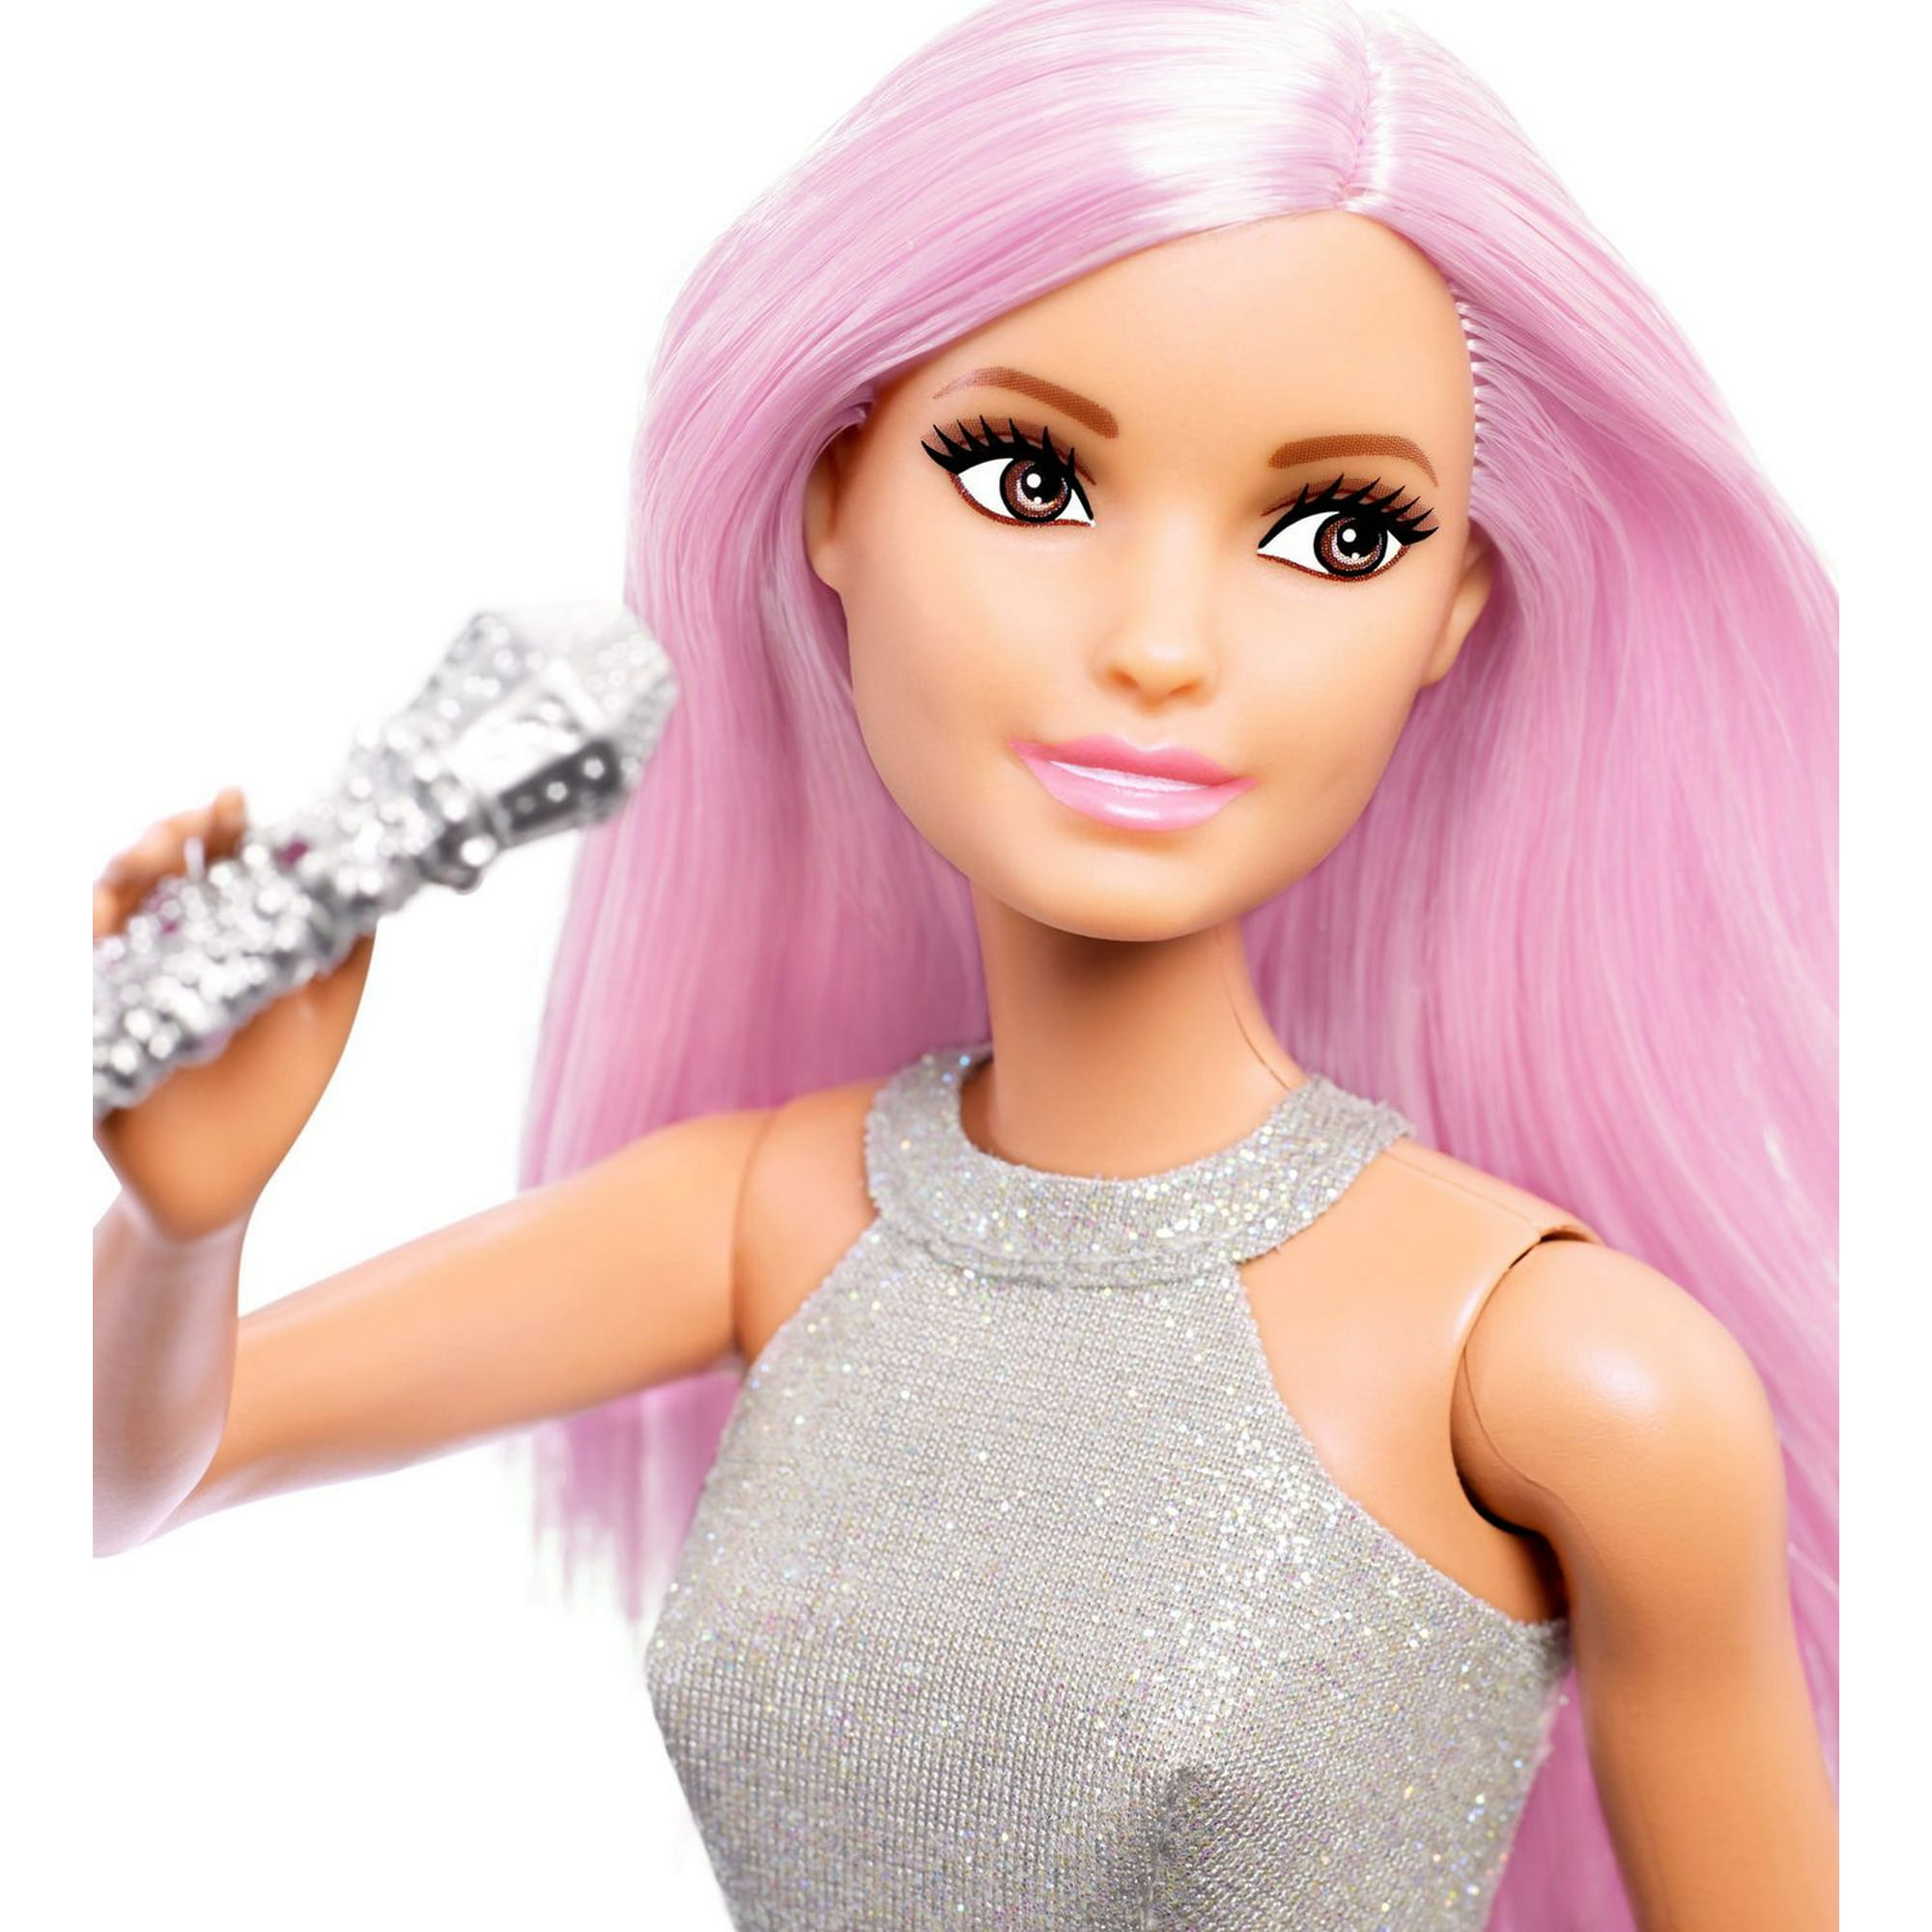 Barbie Pop Star Doll, Ages 3-7 